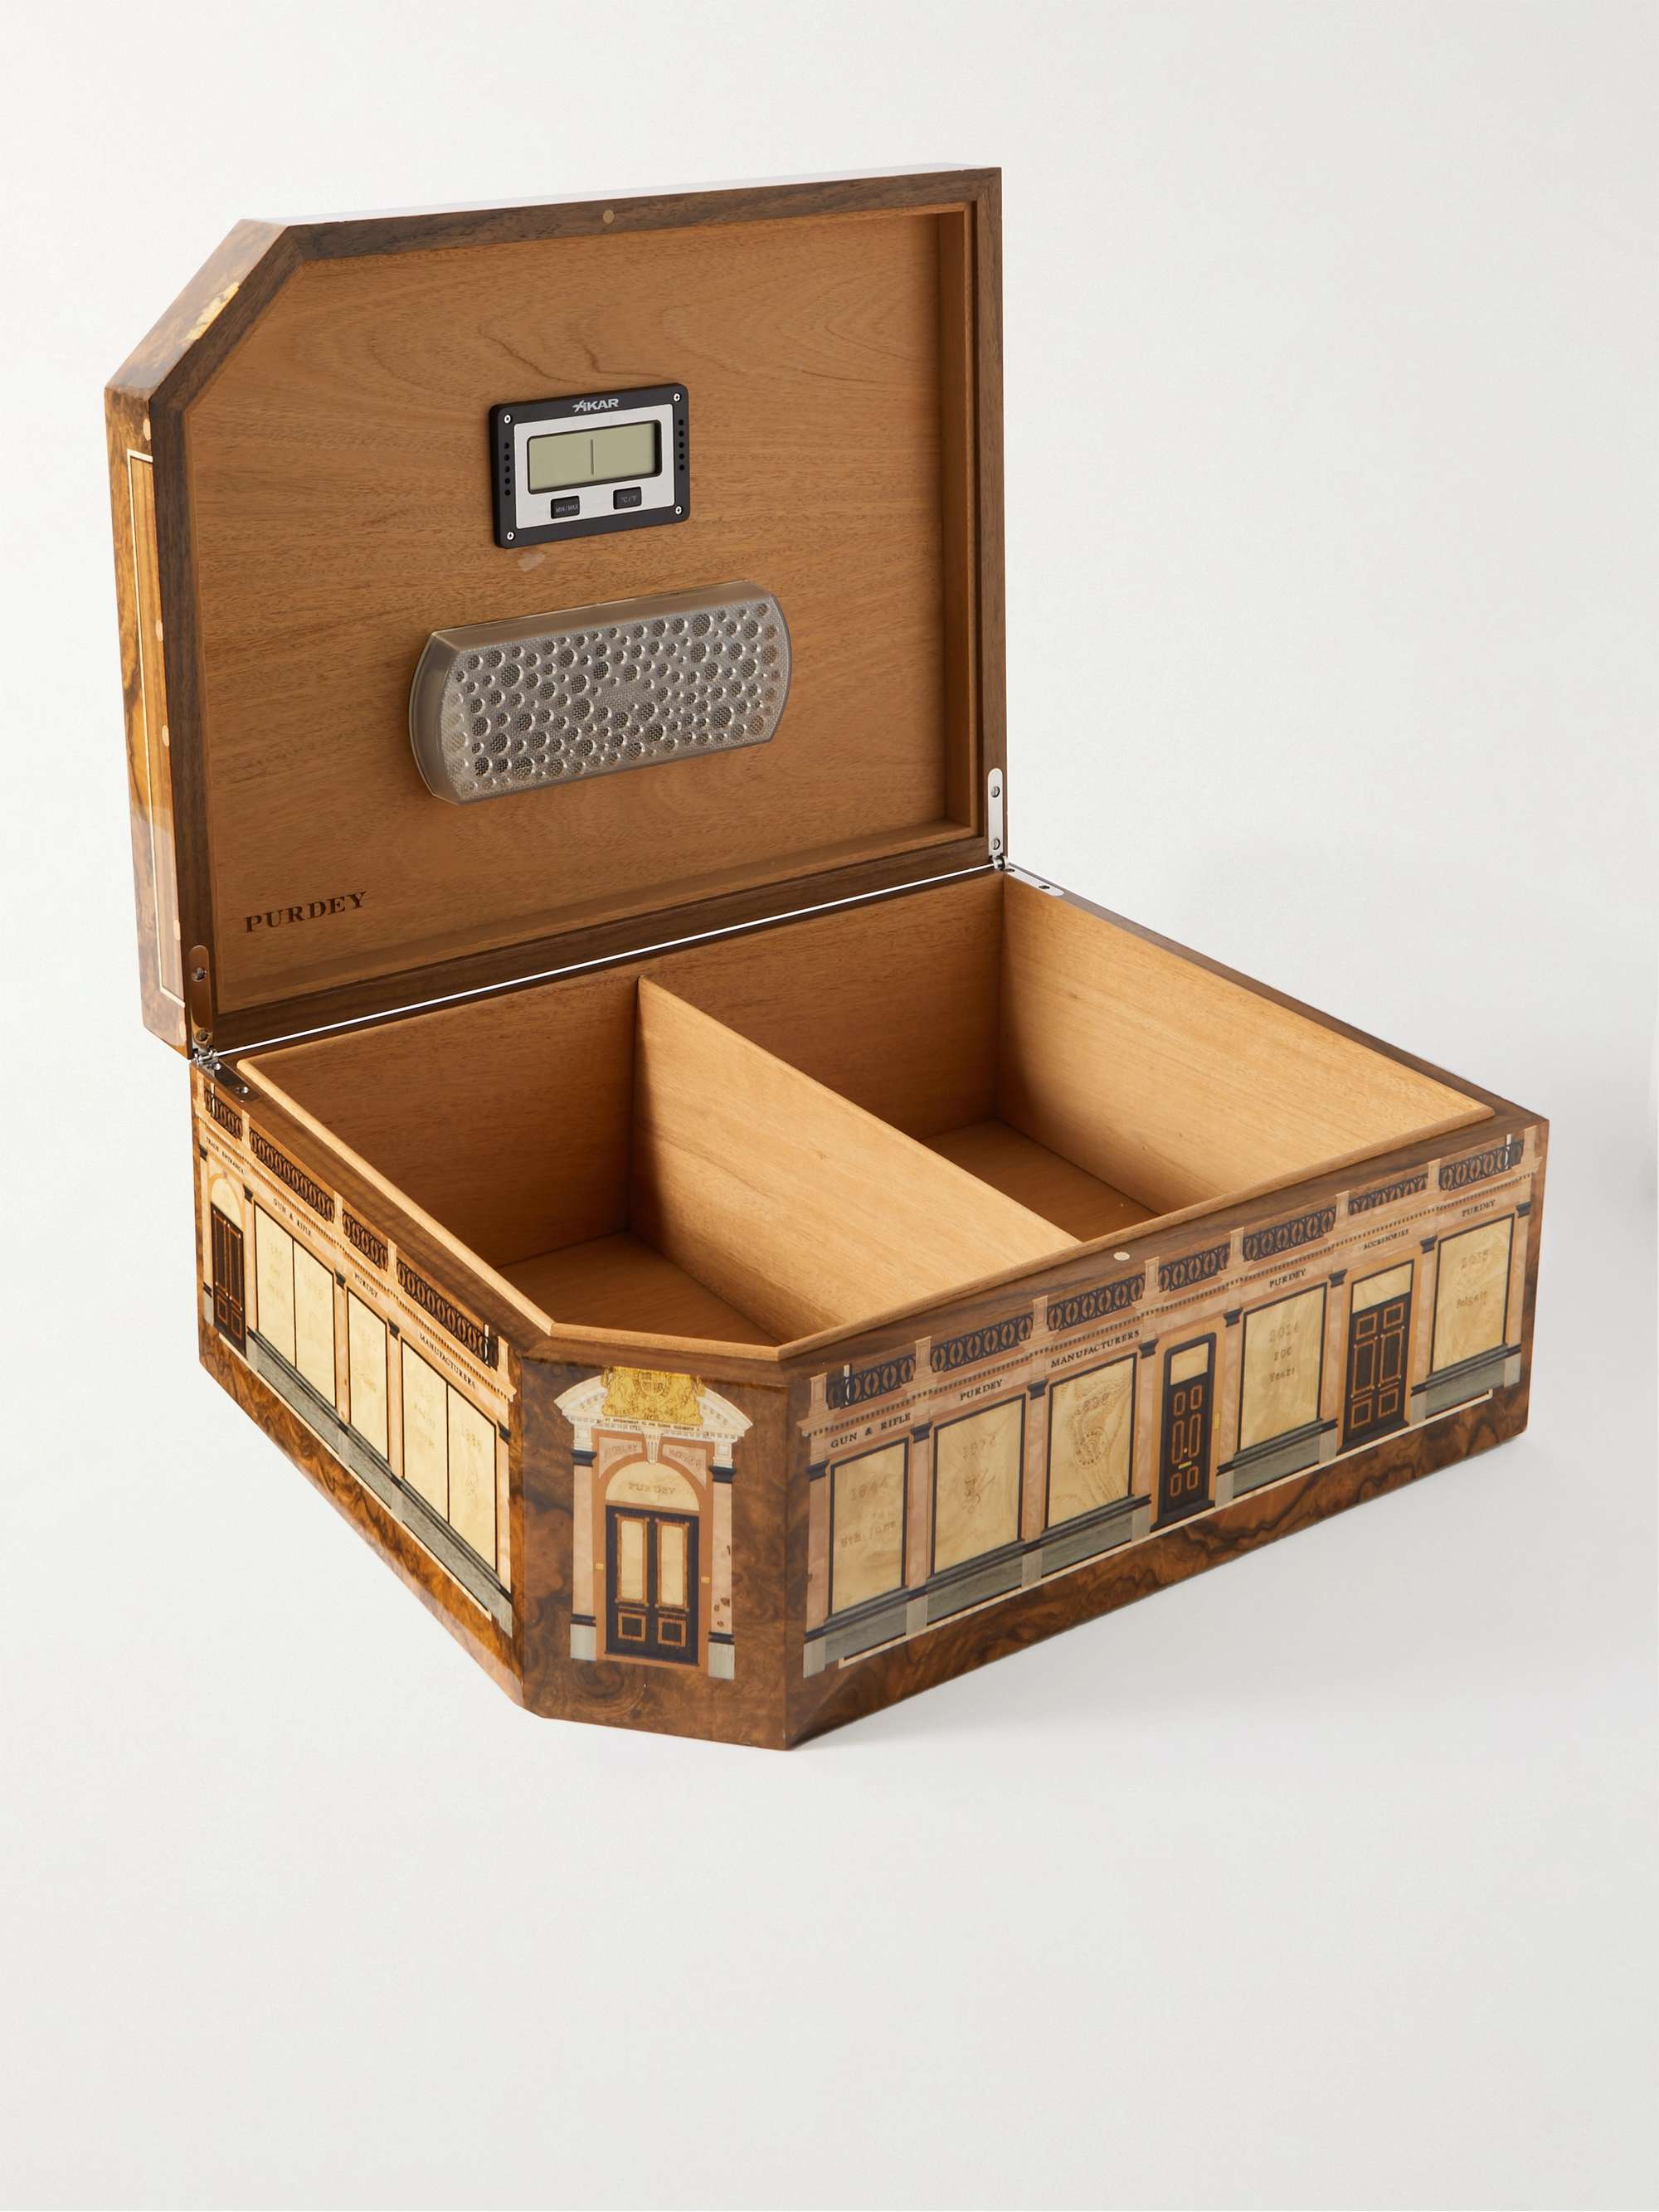 PURDEY Audley House Wood Marquetry Humidor Box